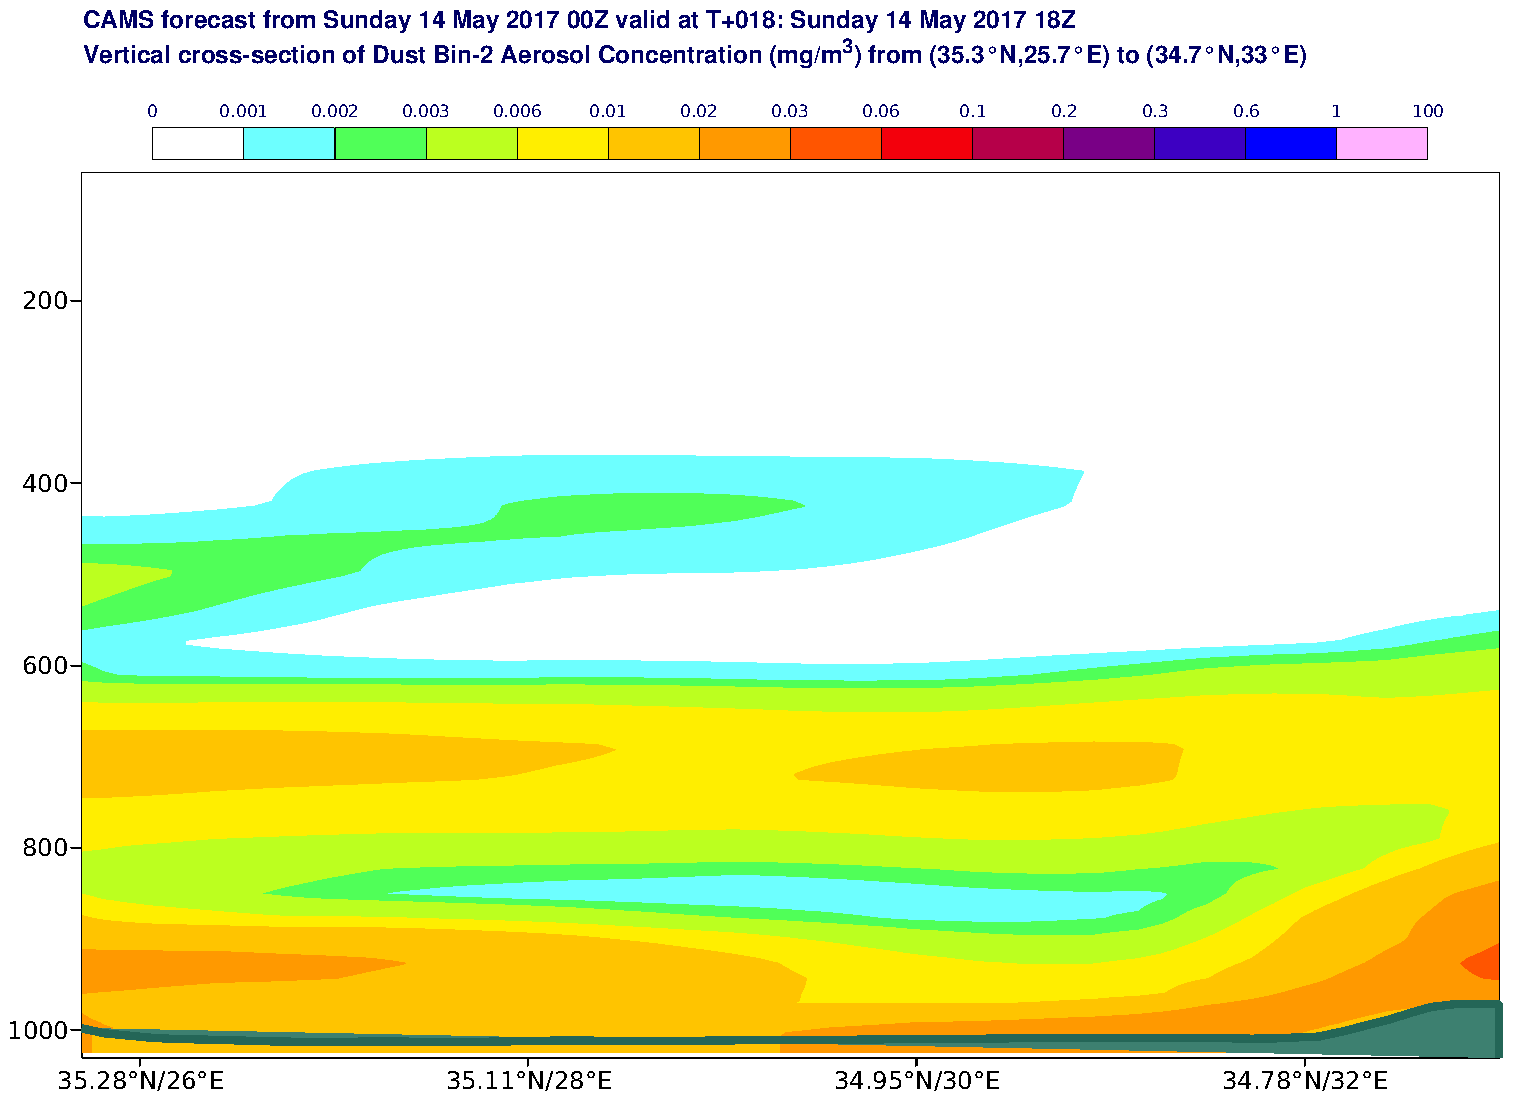 Vertical cross-section of Dust Bin-2 Aerosol Concentration (mg/m3) valid at T18 - 2017-05-14 18:00